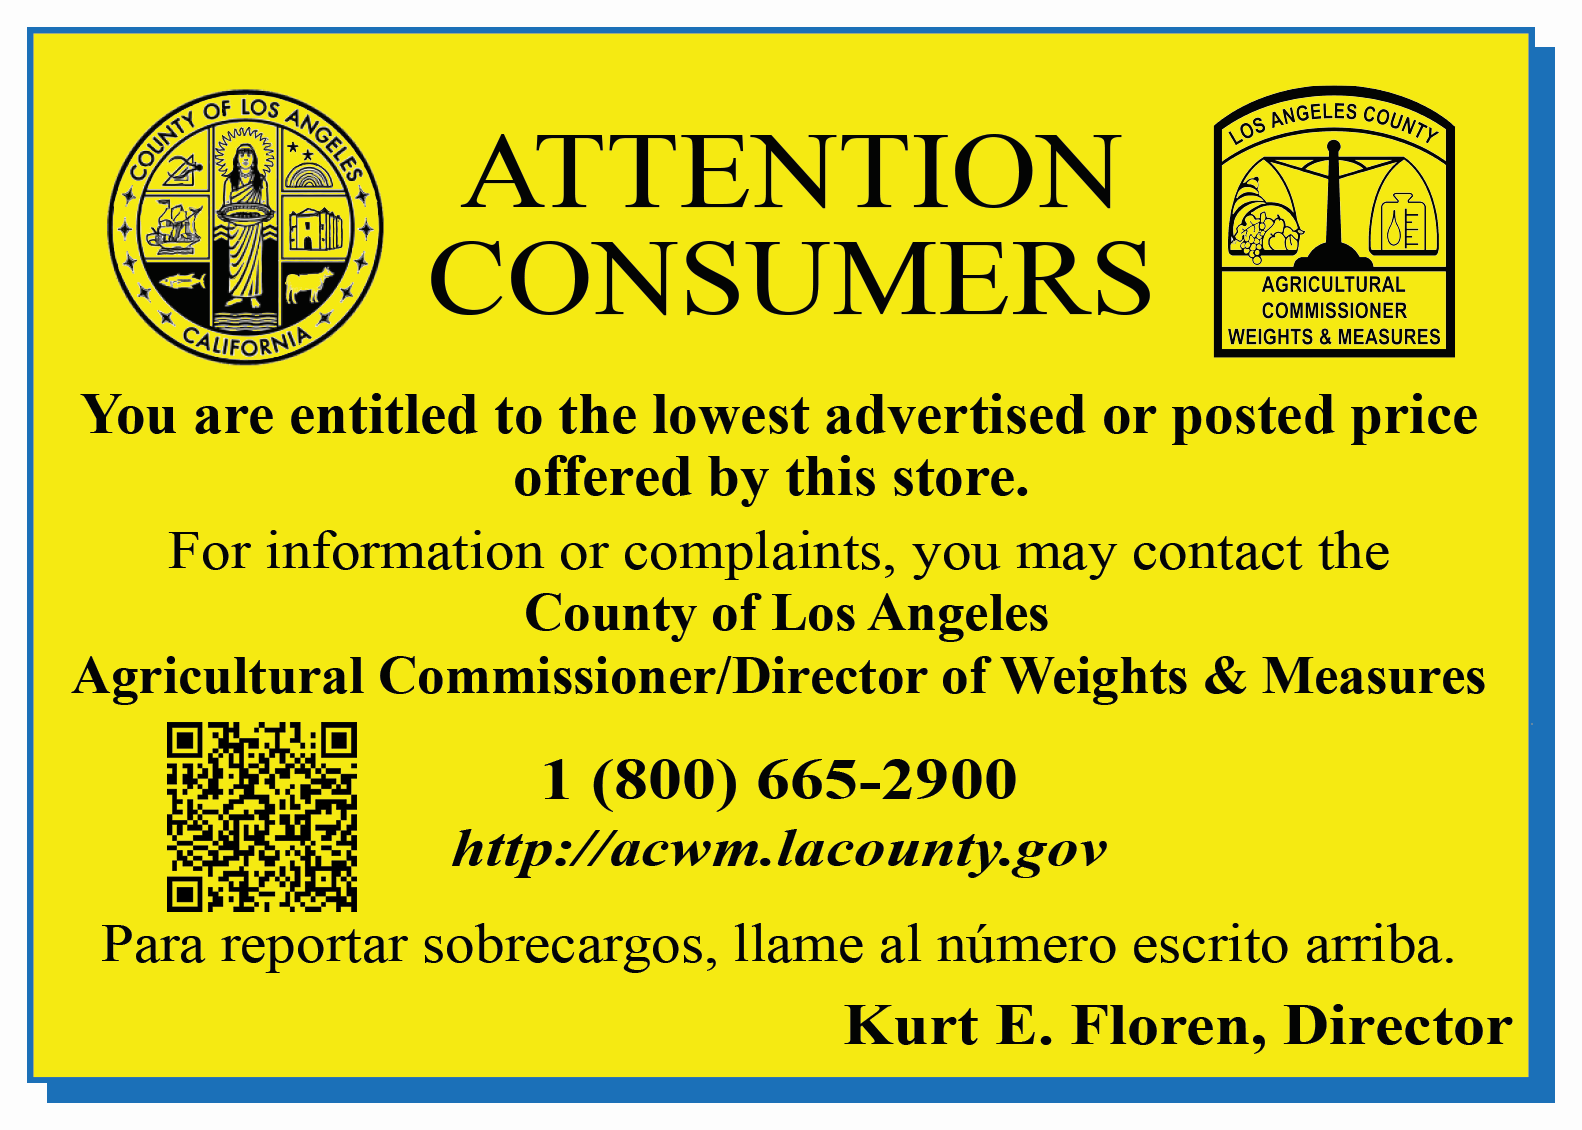 Attention Consumers. You are entitled to the lowest advertised or posted price offered by this store. For information or complaints, you may contact the County of Los Angeles Agricultural Commissioner/Director of Weights and Measures 1 (800) 665-2900. acwm.lacounty.gov. Para reportar sobrecargos, llame al numero escrito arriba.